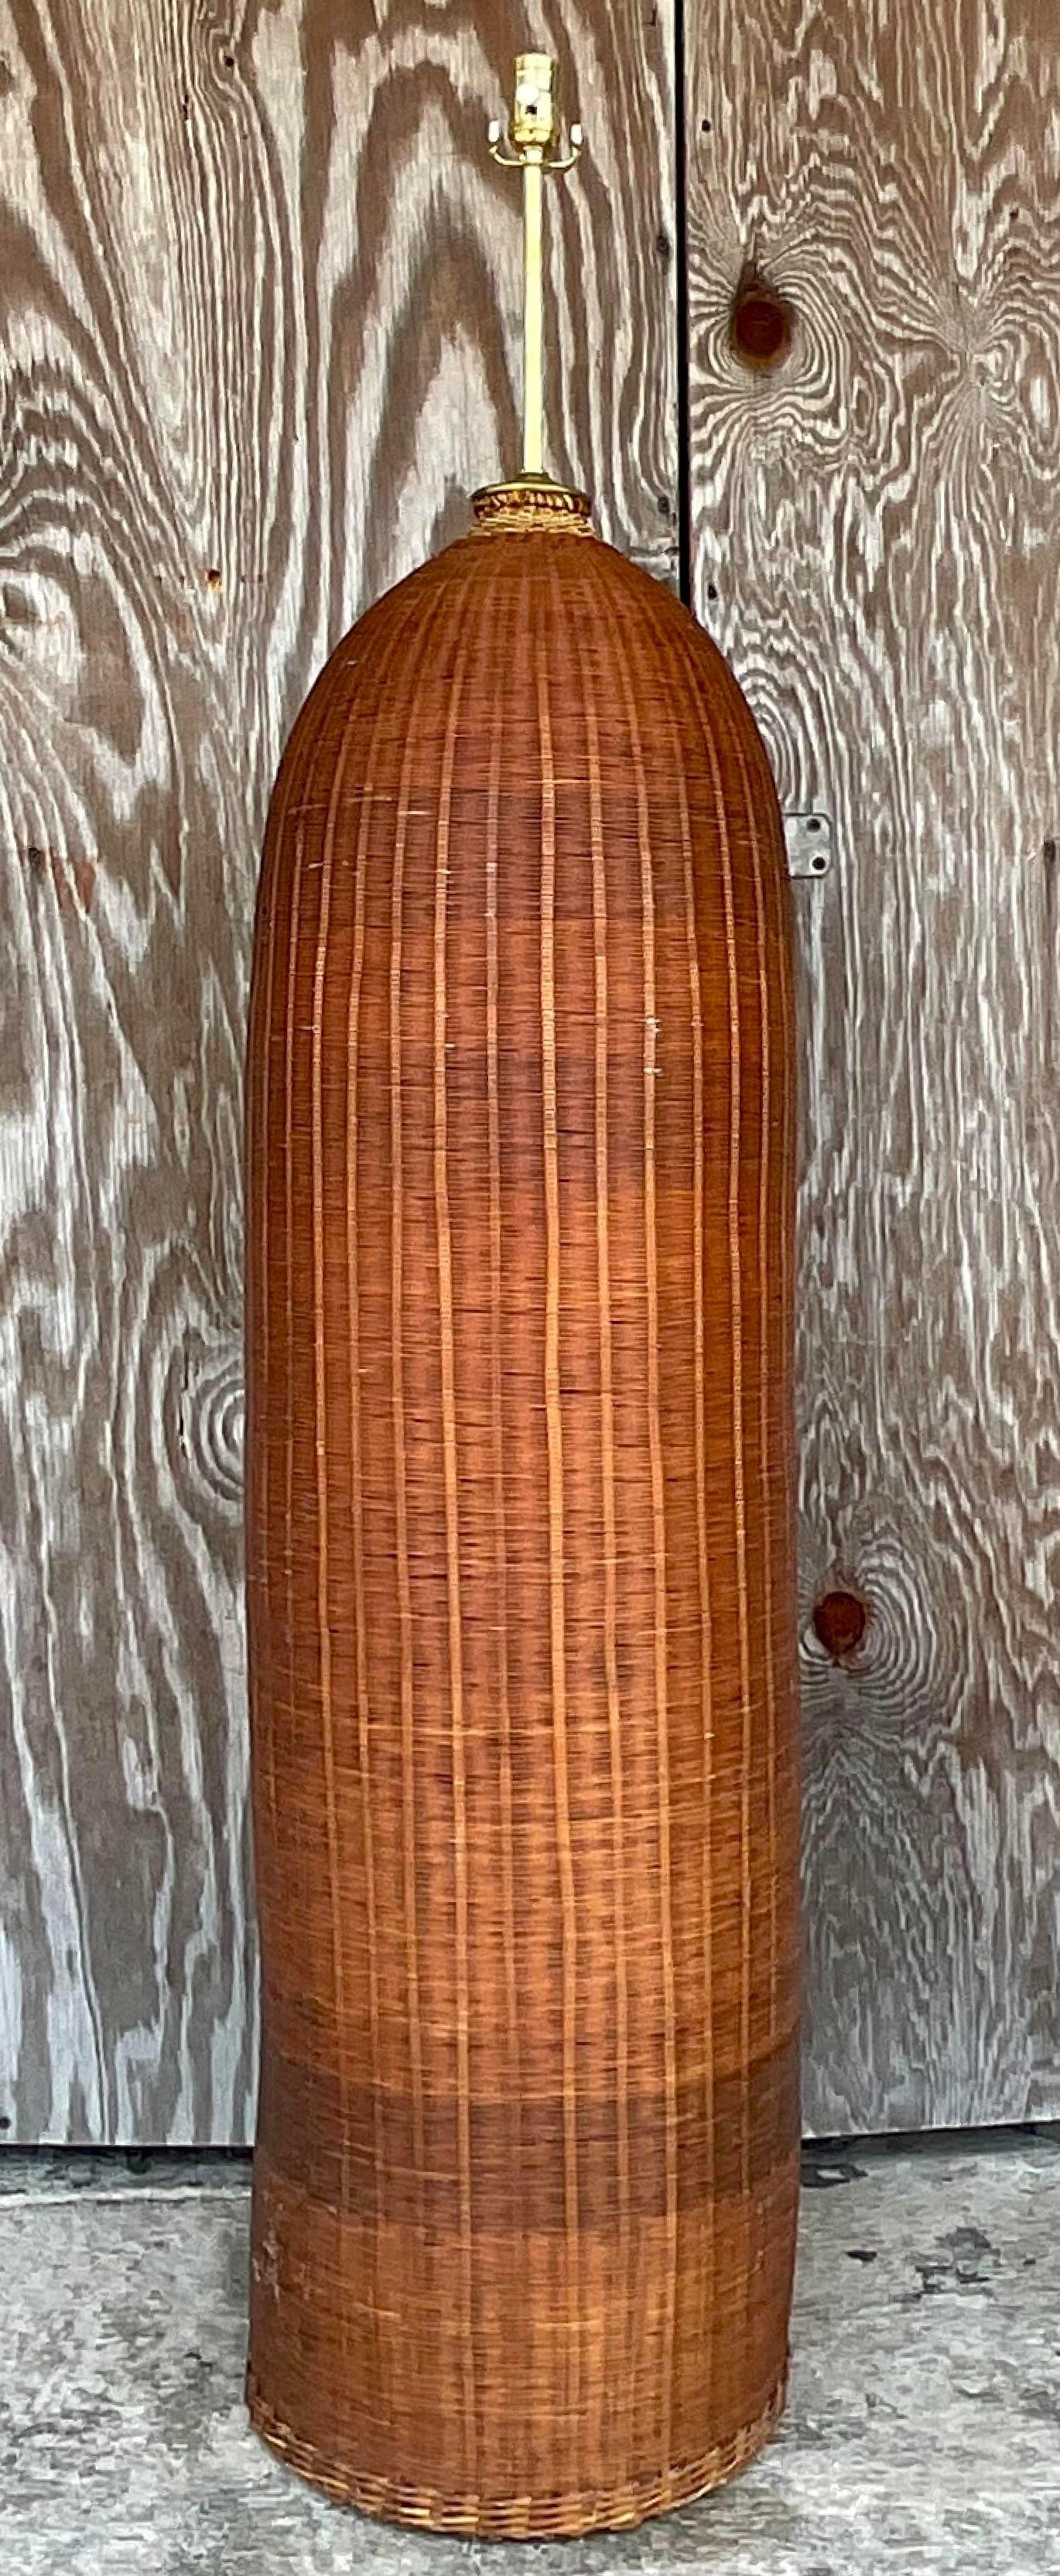 A fantastic vintage Coastal floor lamp. A chic cylinder shape in a warm brown patina. Fully restored with all new hardware and wiring. Acquired from a Palm Beach estate.